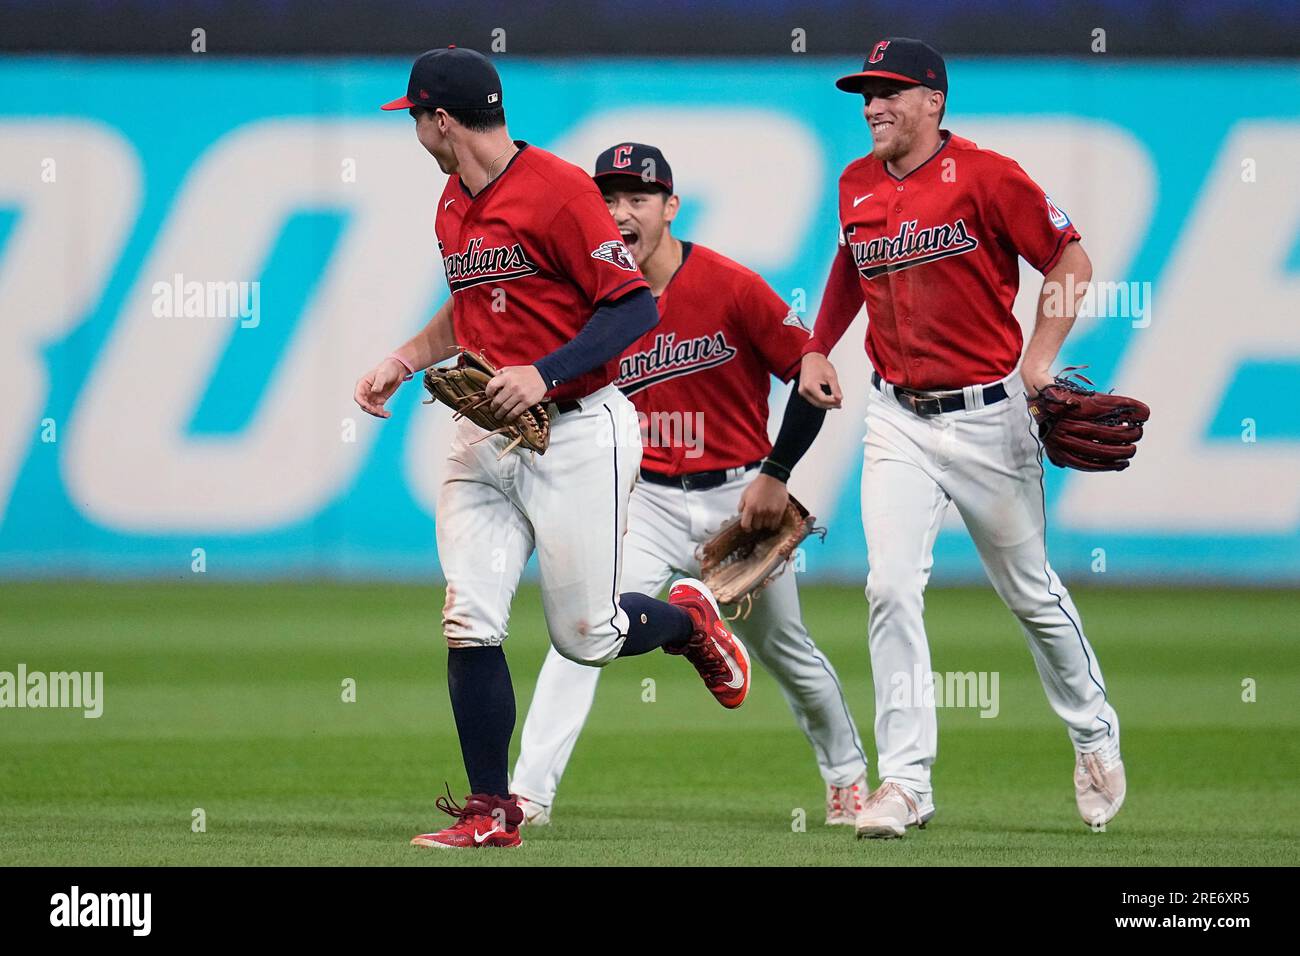 What Should Cleveland Guardians Do About Their Outfield? - Sports